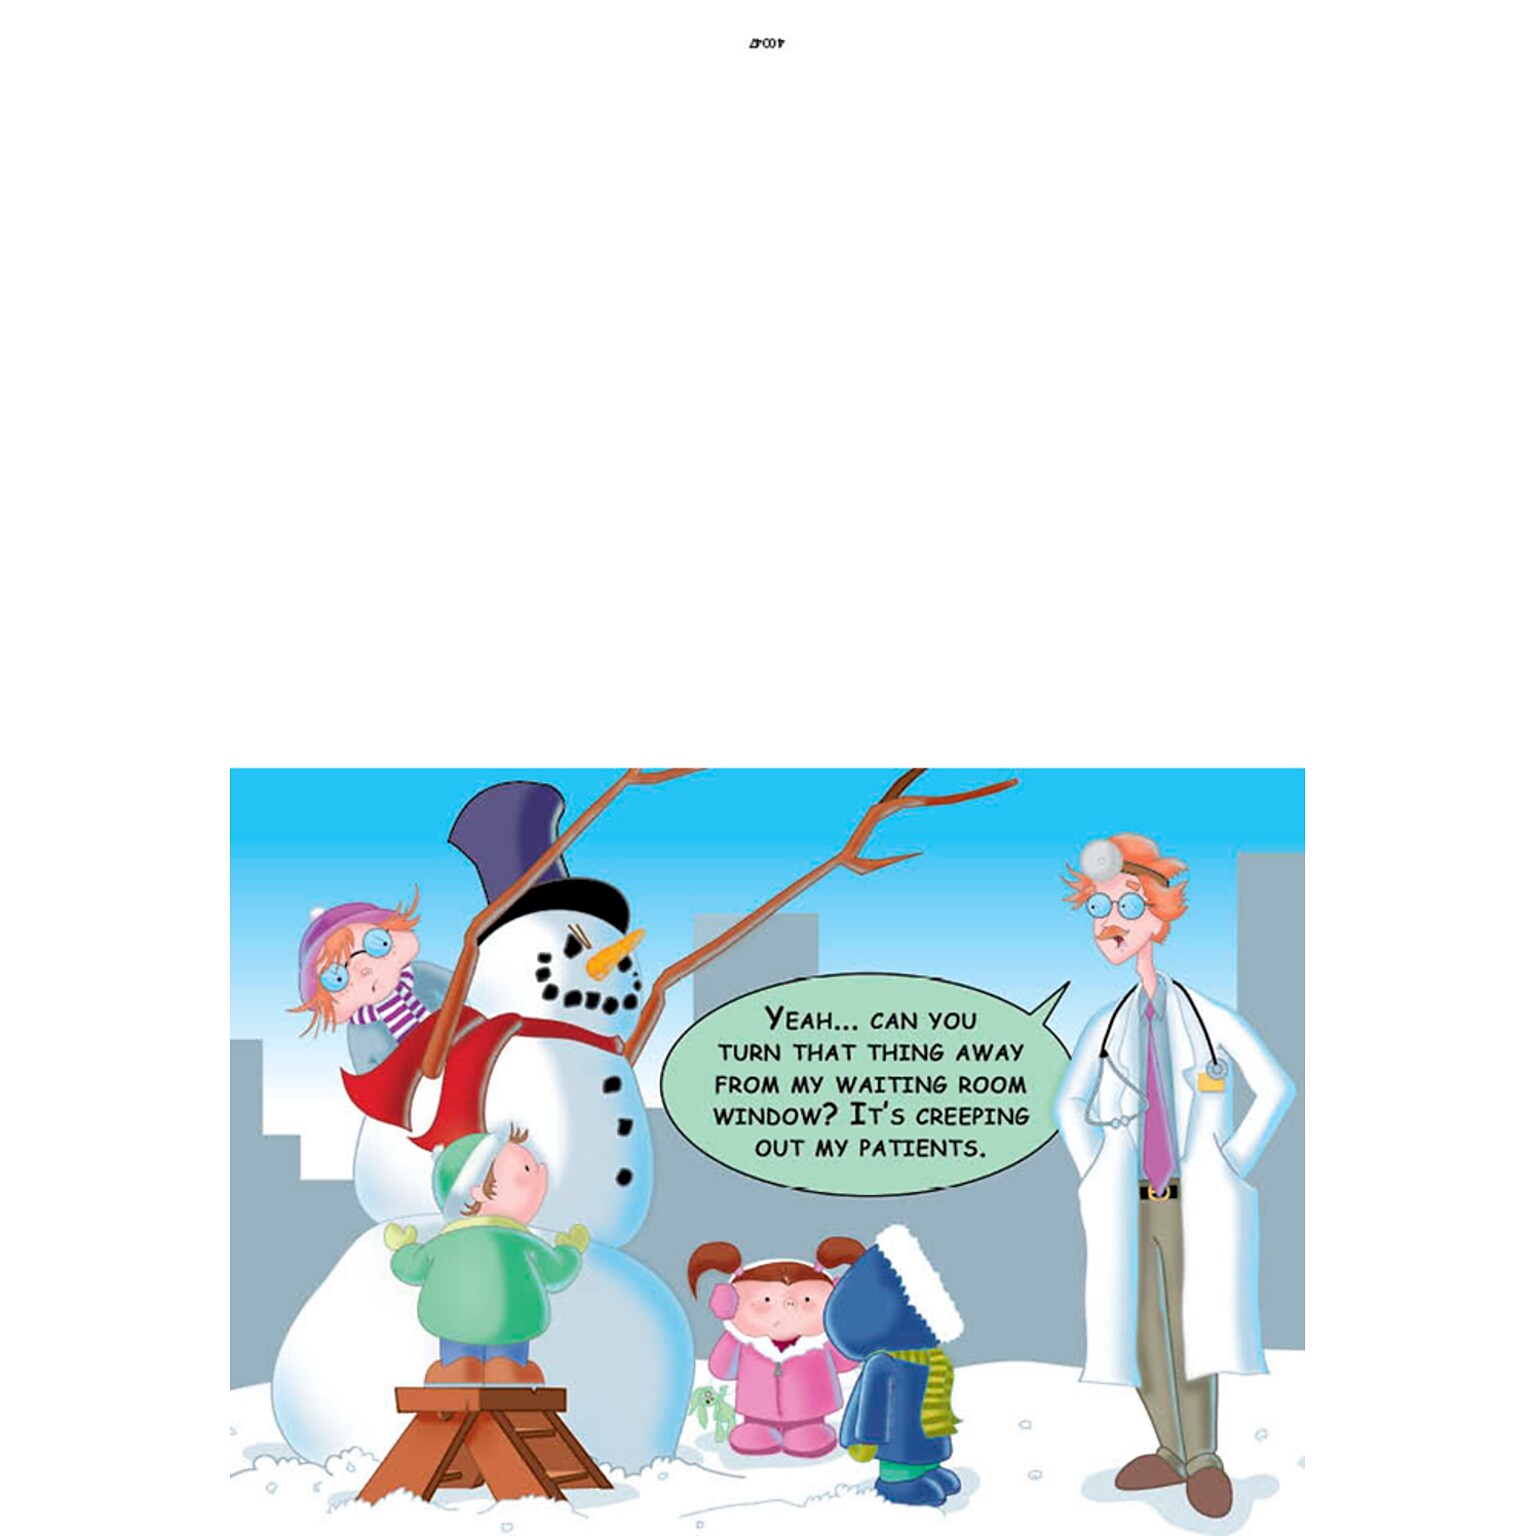 Snowman creeping Dr out with kids - 7 x 10 scored for folding to 7 x 5, 25 cards w/A7 envelopes per set